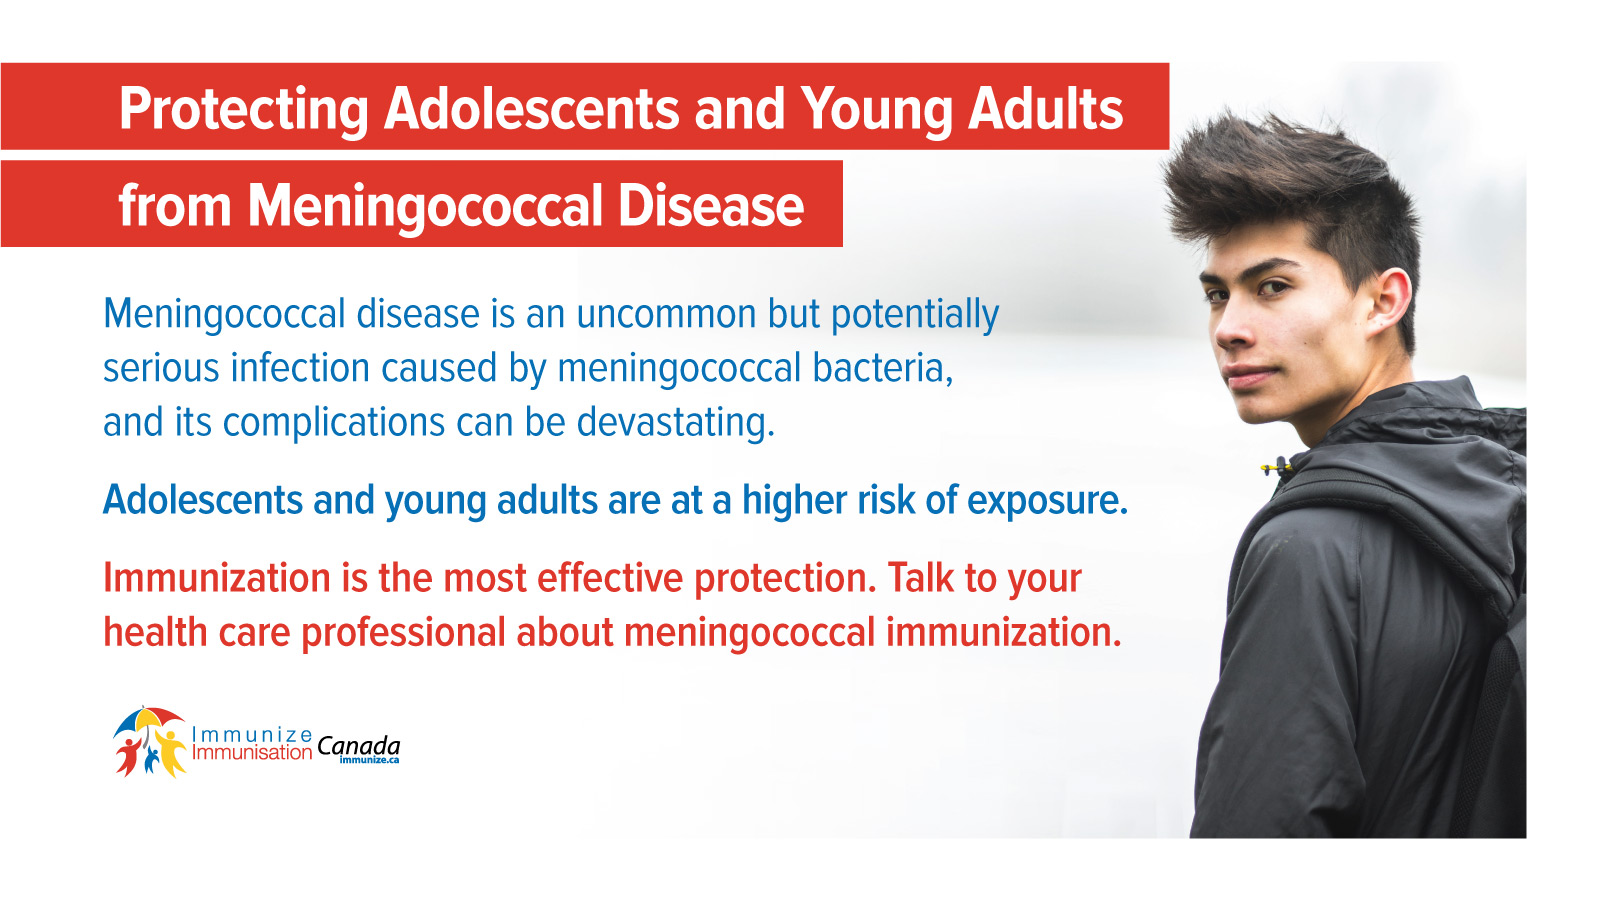 ​Protecting Adolescents and Young Adults from Meningococcal Disease - image 3 for Twitter